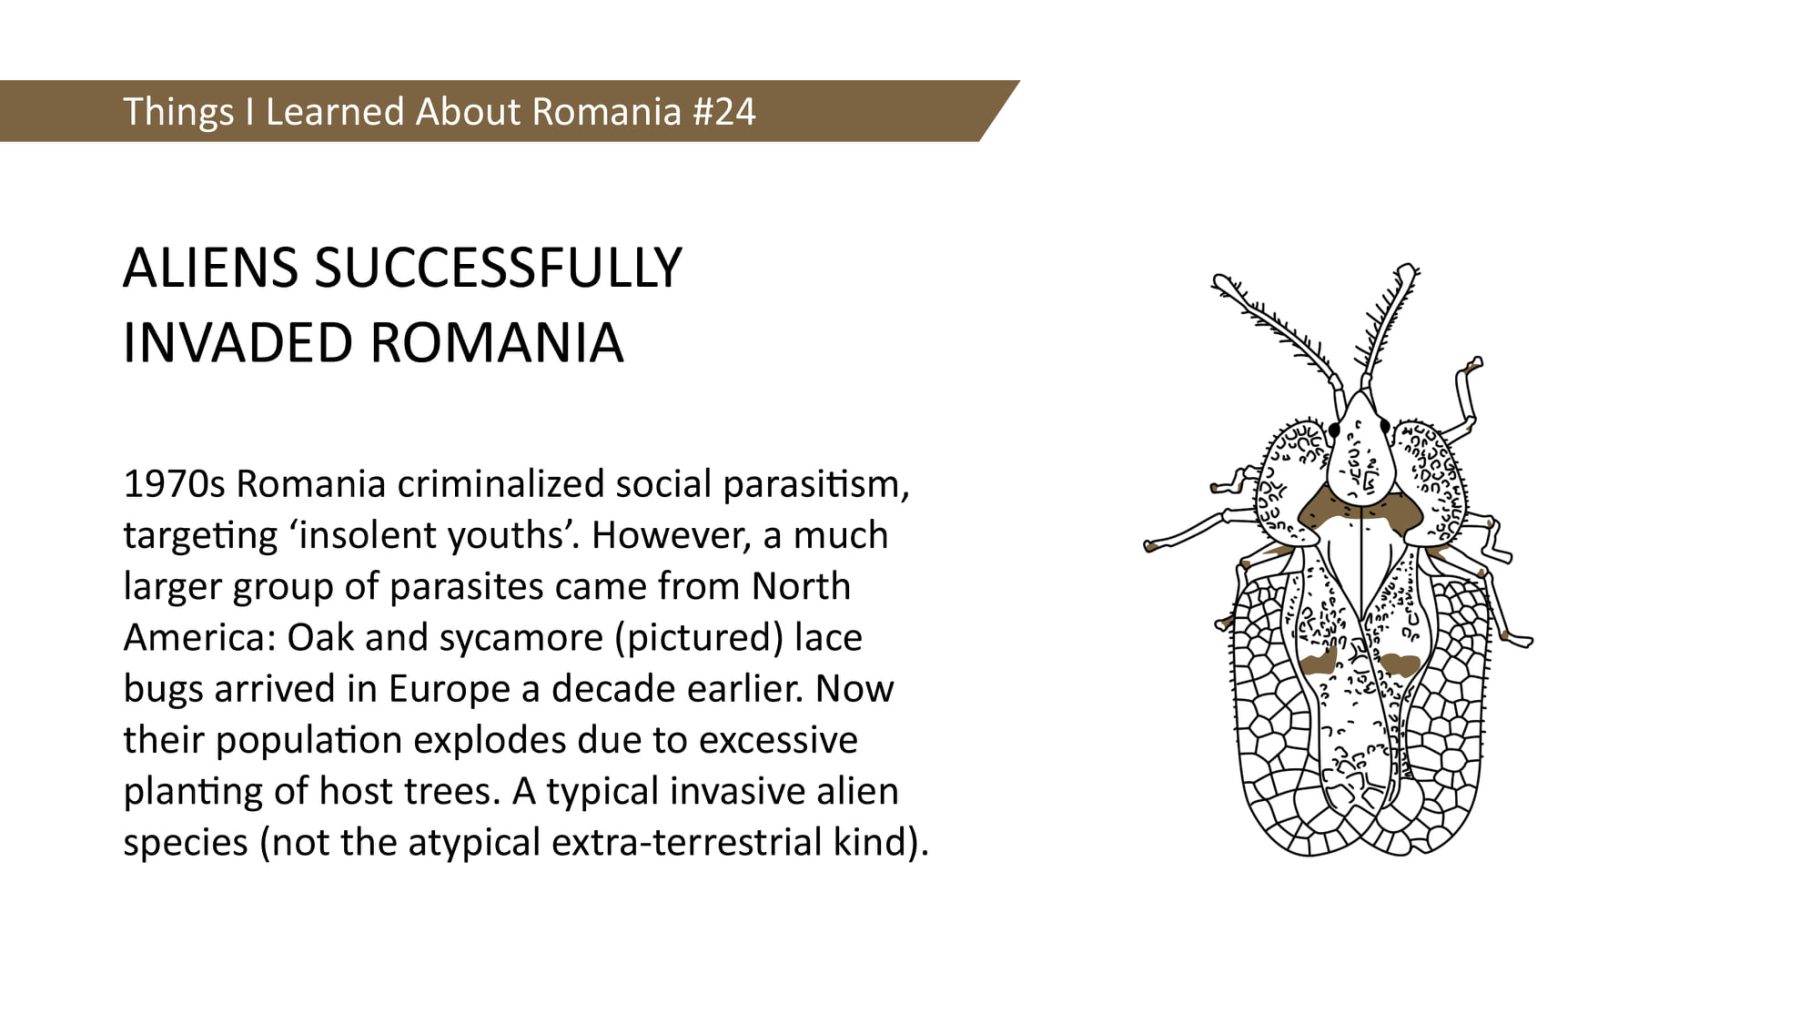 Things I Learned About Romania #24 - 1970s Romania criminalized social parasitism, targeting 'insolent youths'. However, a much larger group of parasites came from North America: Oak and sycamore (pictured) lace bugs arrived in Europe a decade earlier. Now their population explodes due to excessive planting of host trees. A typical invasive alien species (not the atypical extra-terrestrial kind).